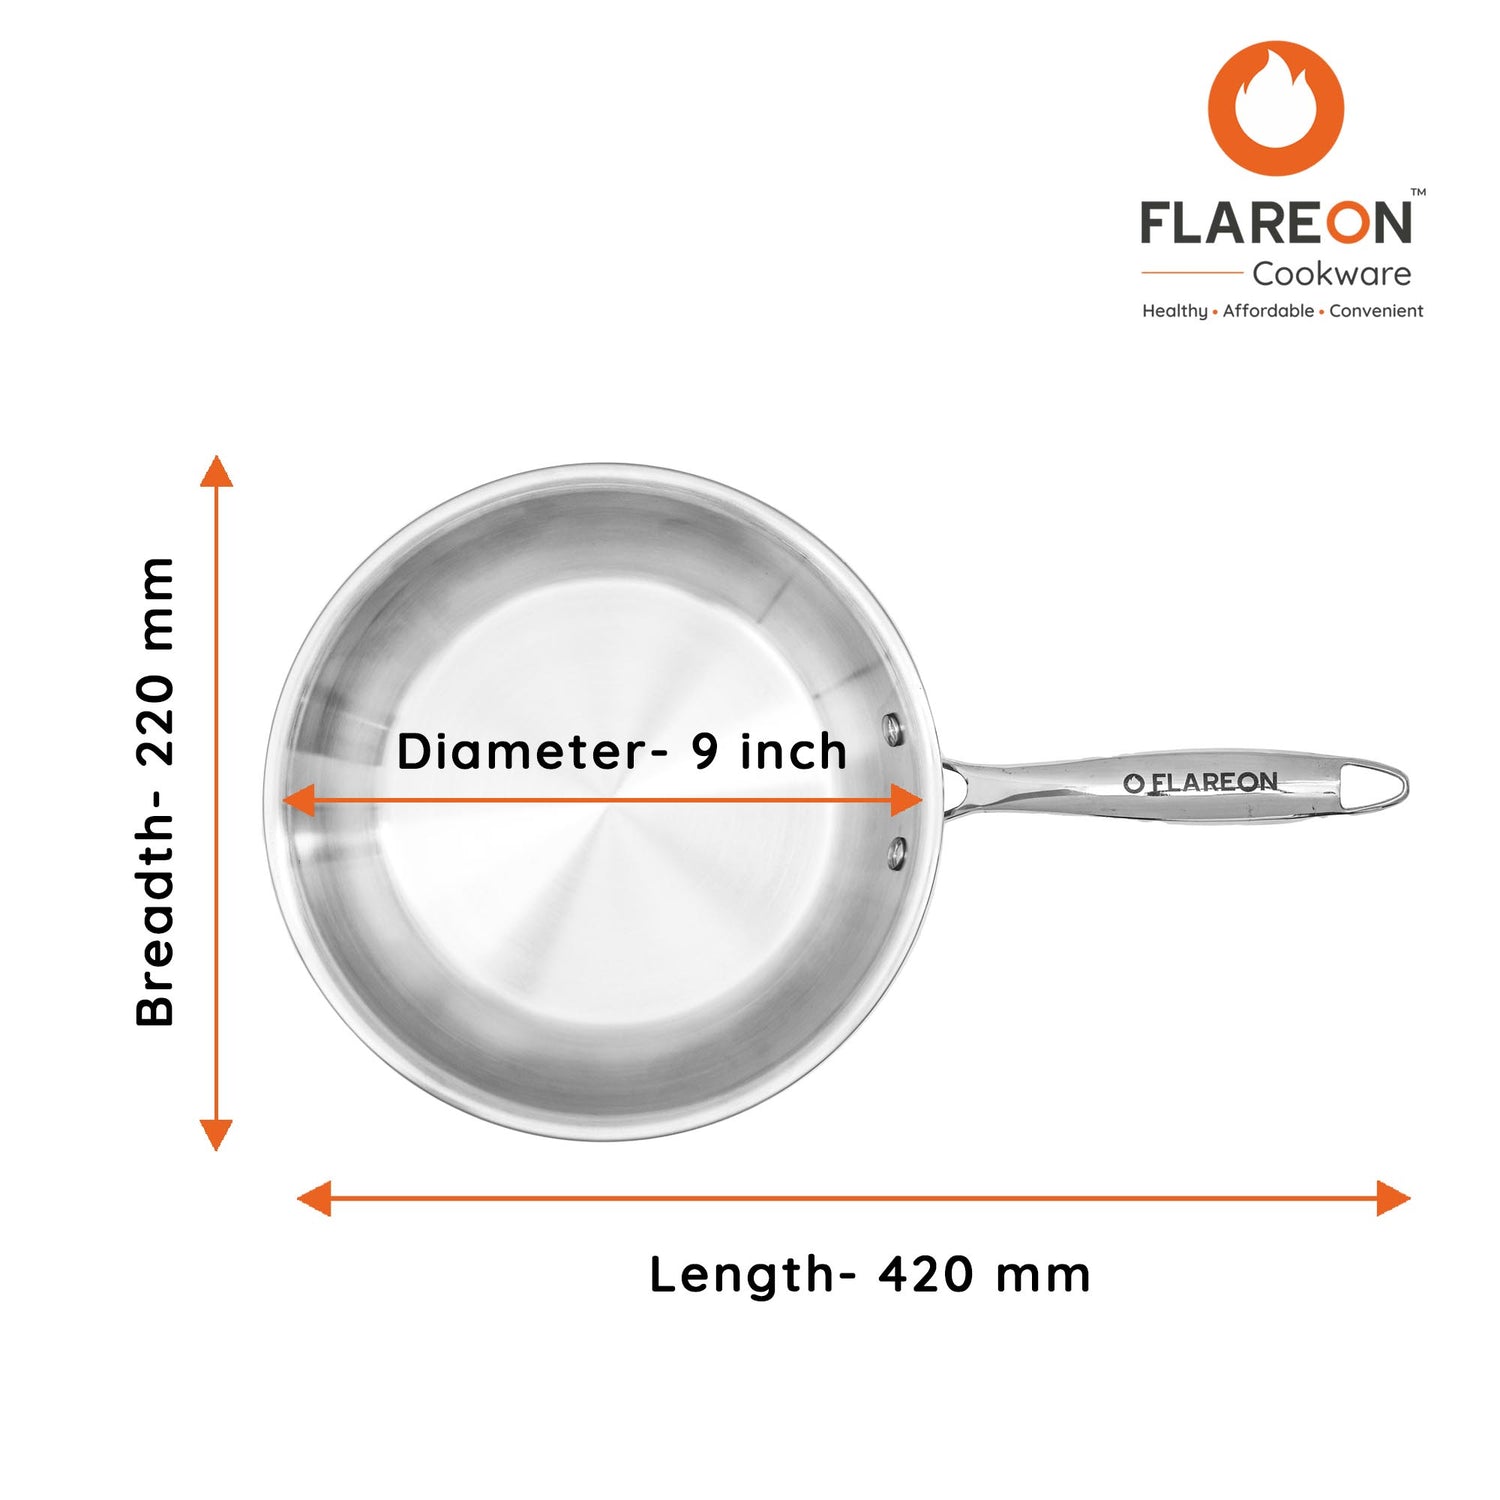 FlareOn's TriPly Stainless Steel Fry Pan 22 Cm- Product Dimensions